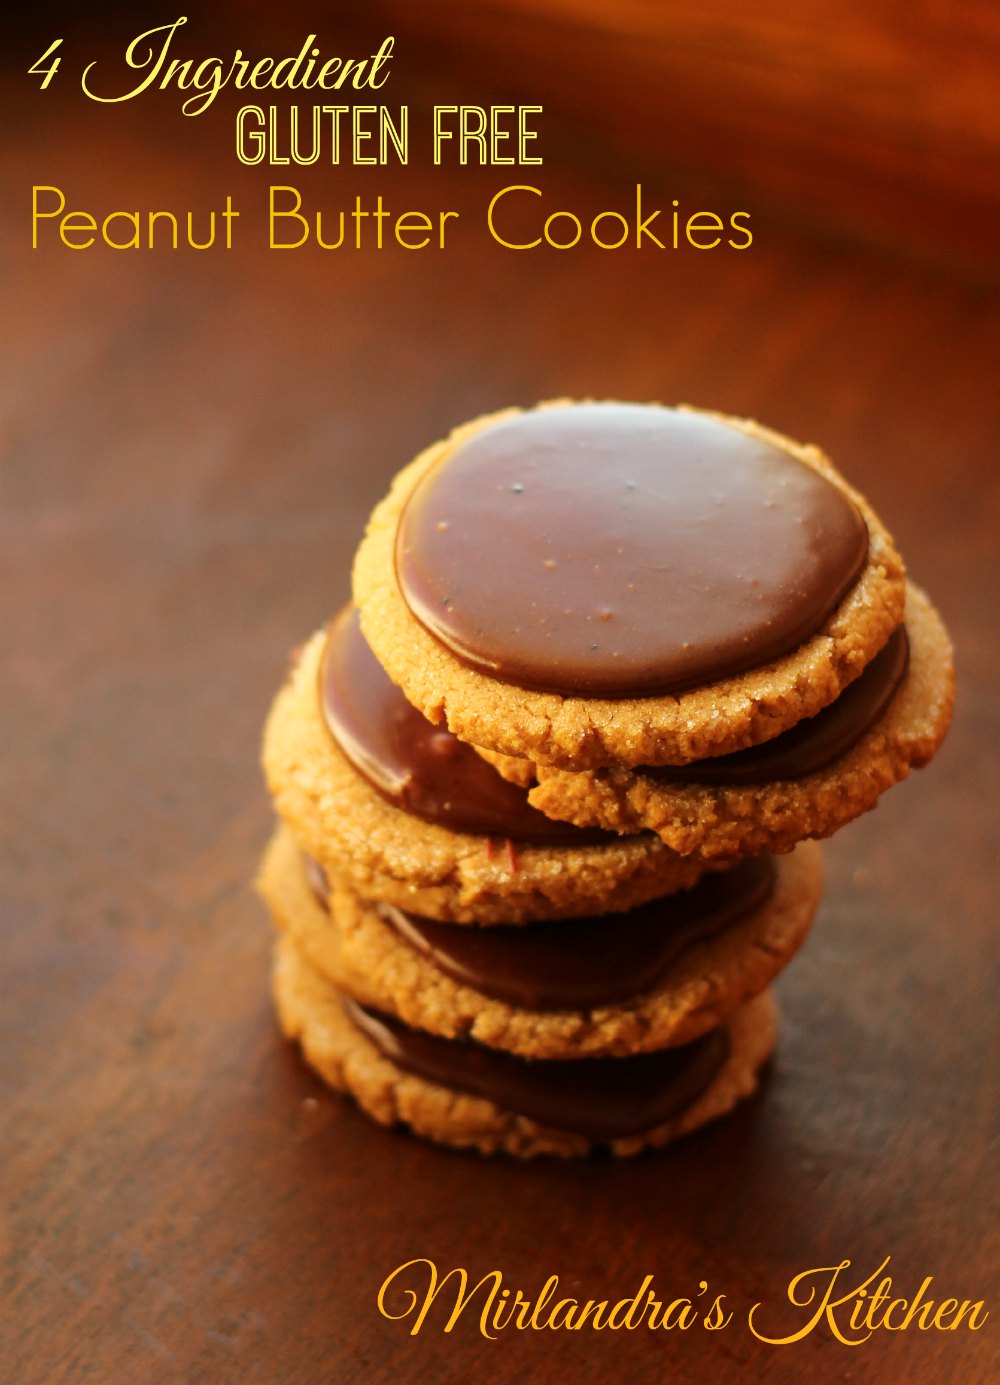 These gluten free peanut butter cookies call for just 4 ingredients and you can't tell they are GF. Add the amazing chocolate frosting for something extra.